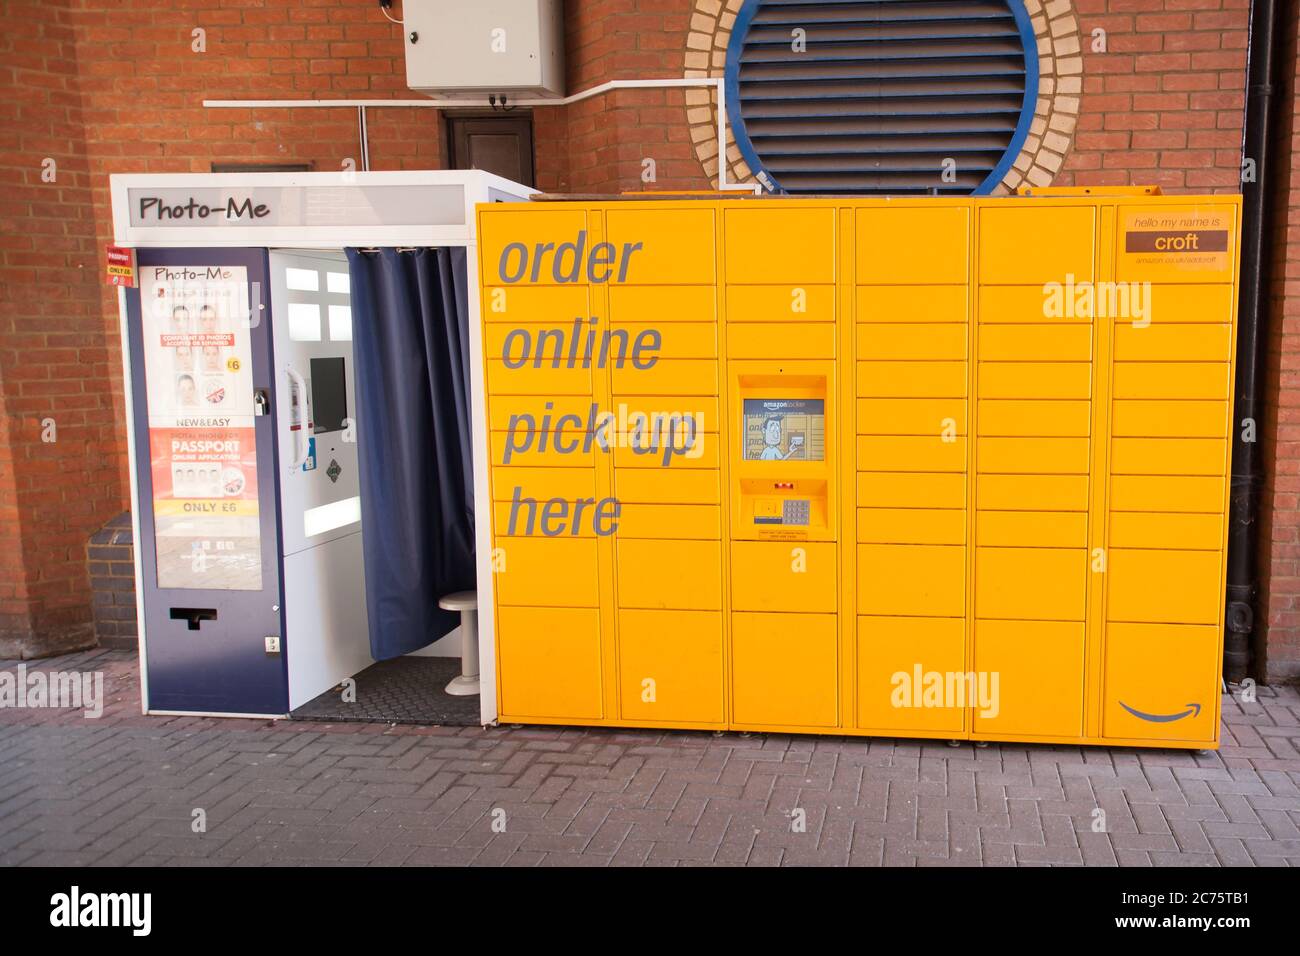 A photo me booth and an Amazon locker point in Oxford in the UK Stock Photo